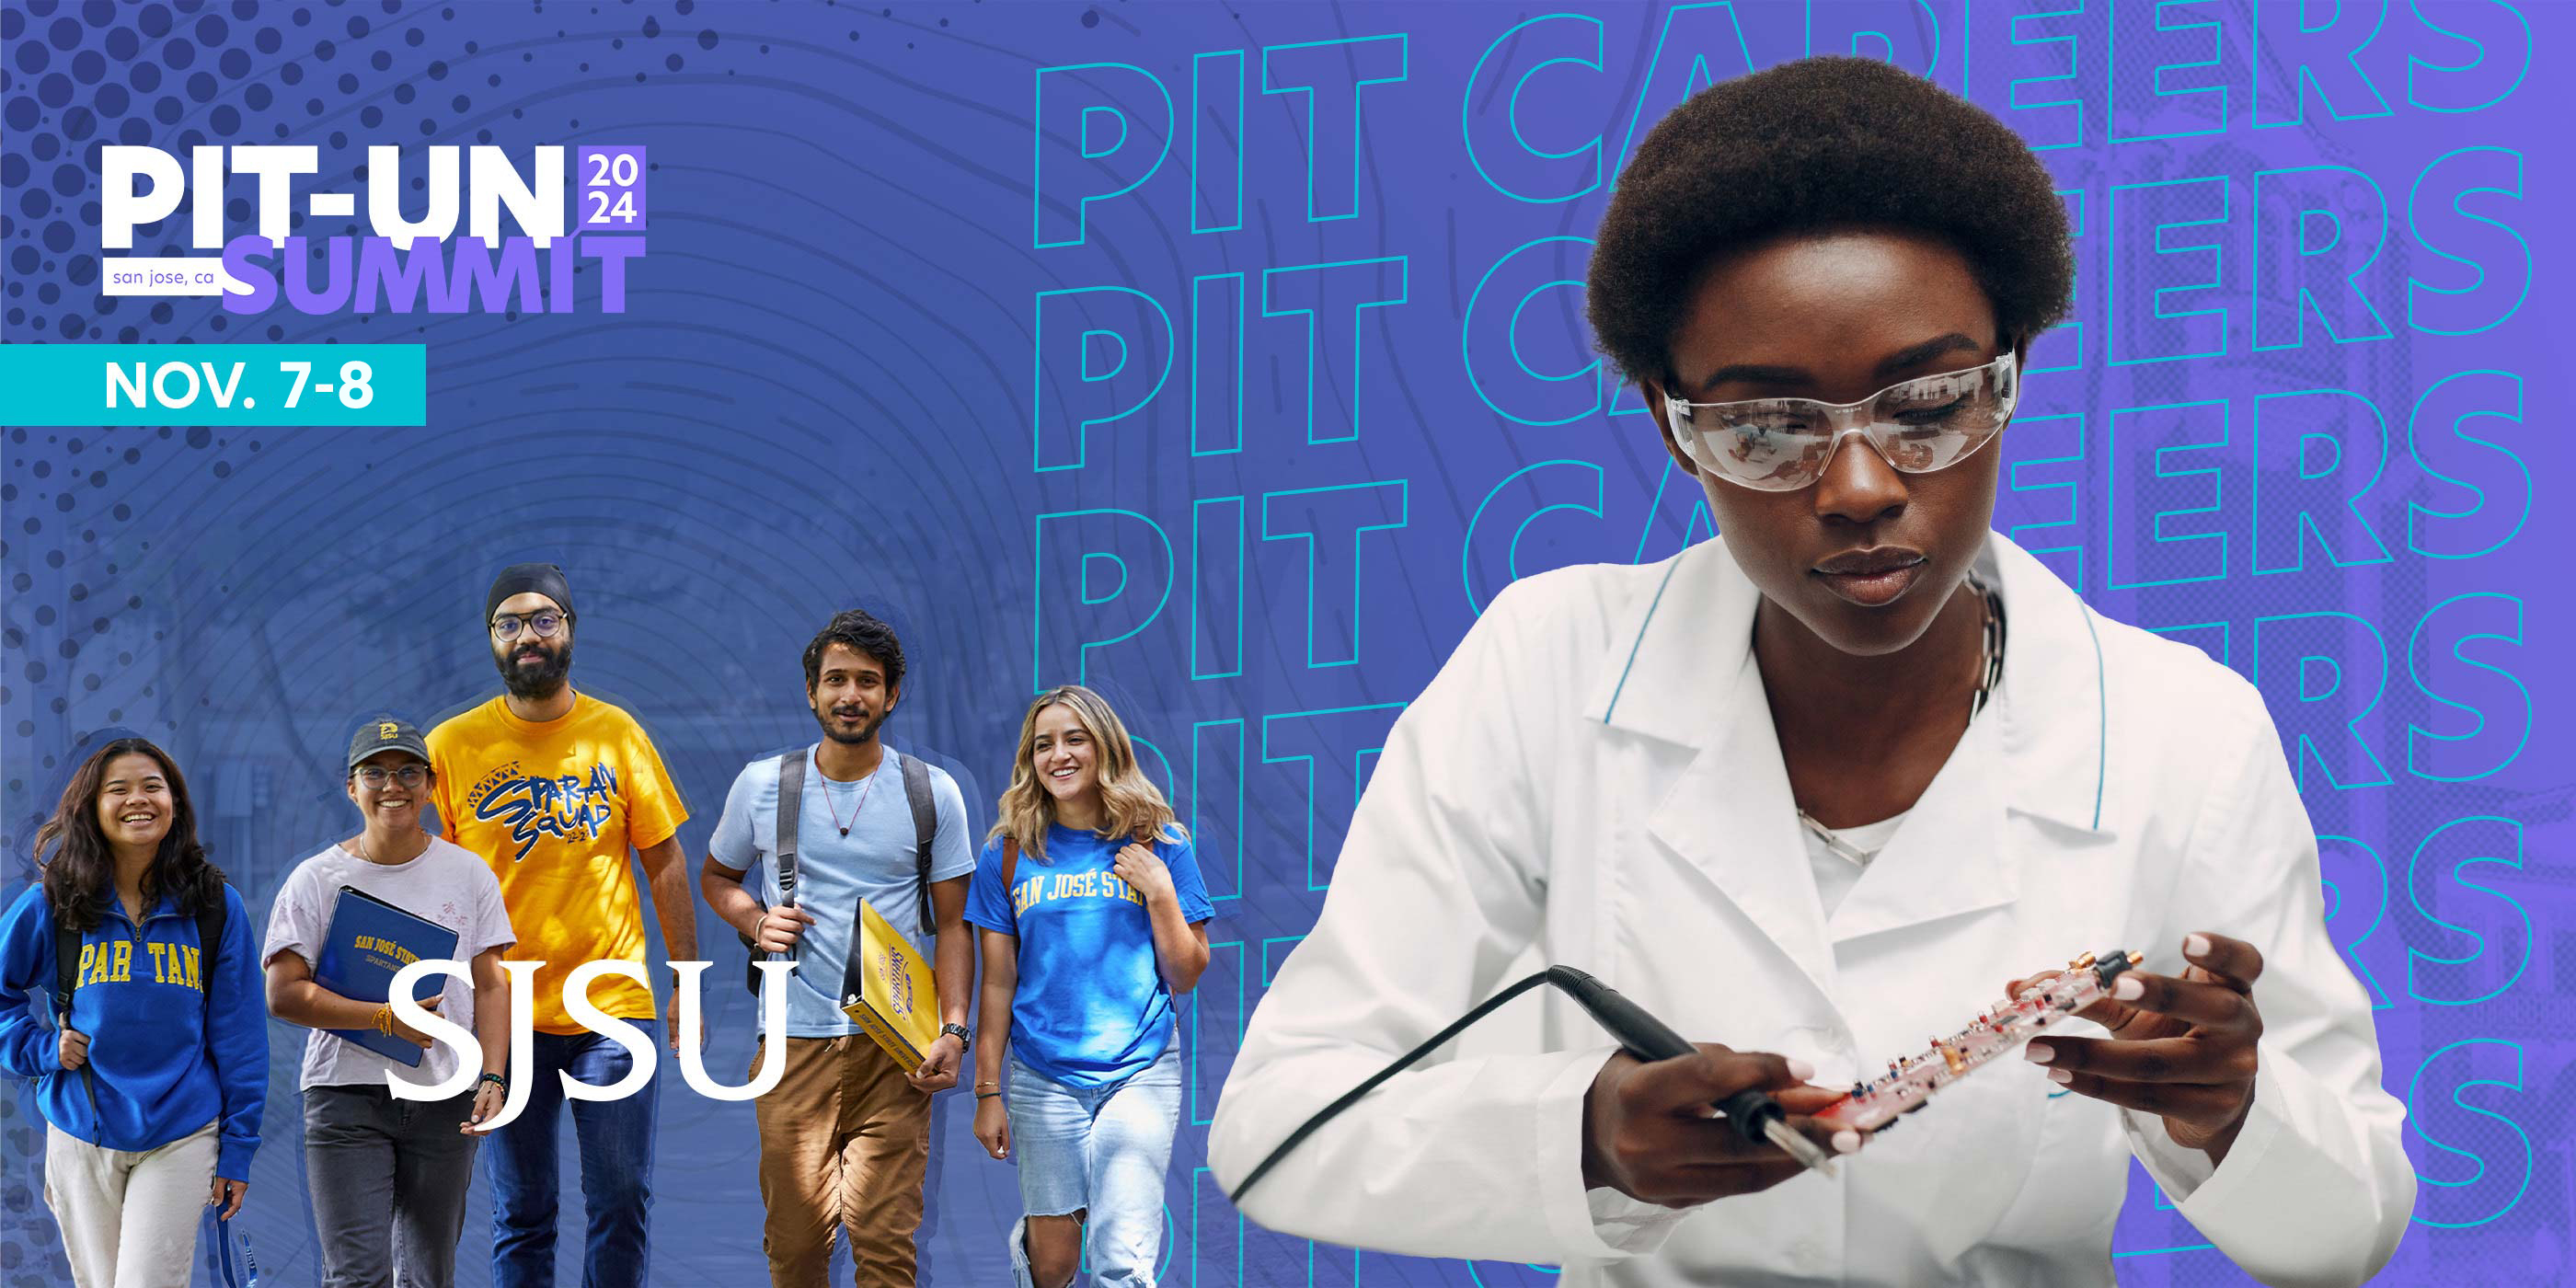 PIT-UN Summit 2025, Nov. 6-8, with students in SJSU gear and a student in a lab coat working.